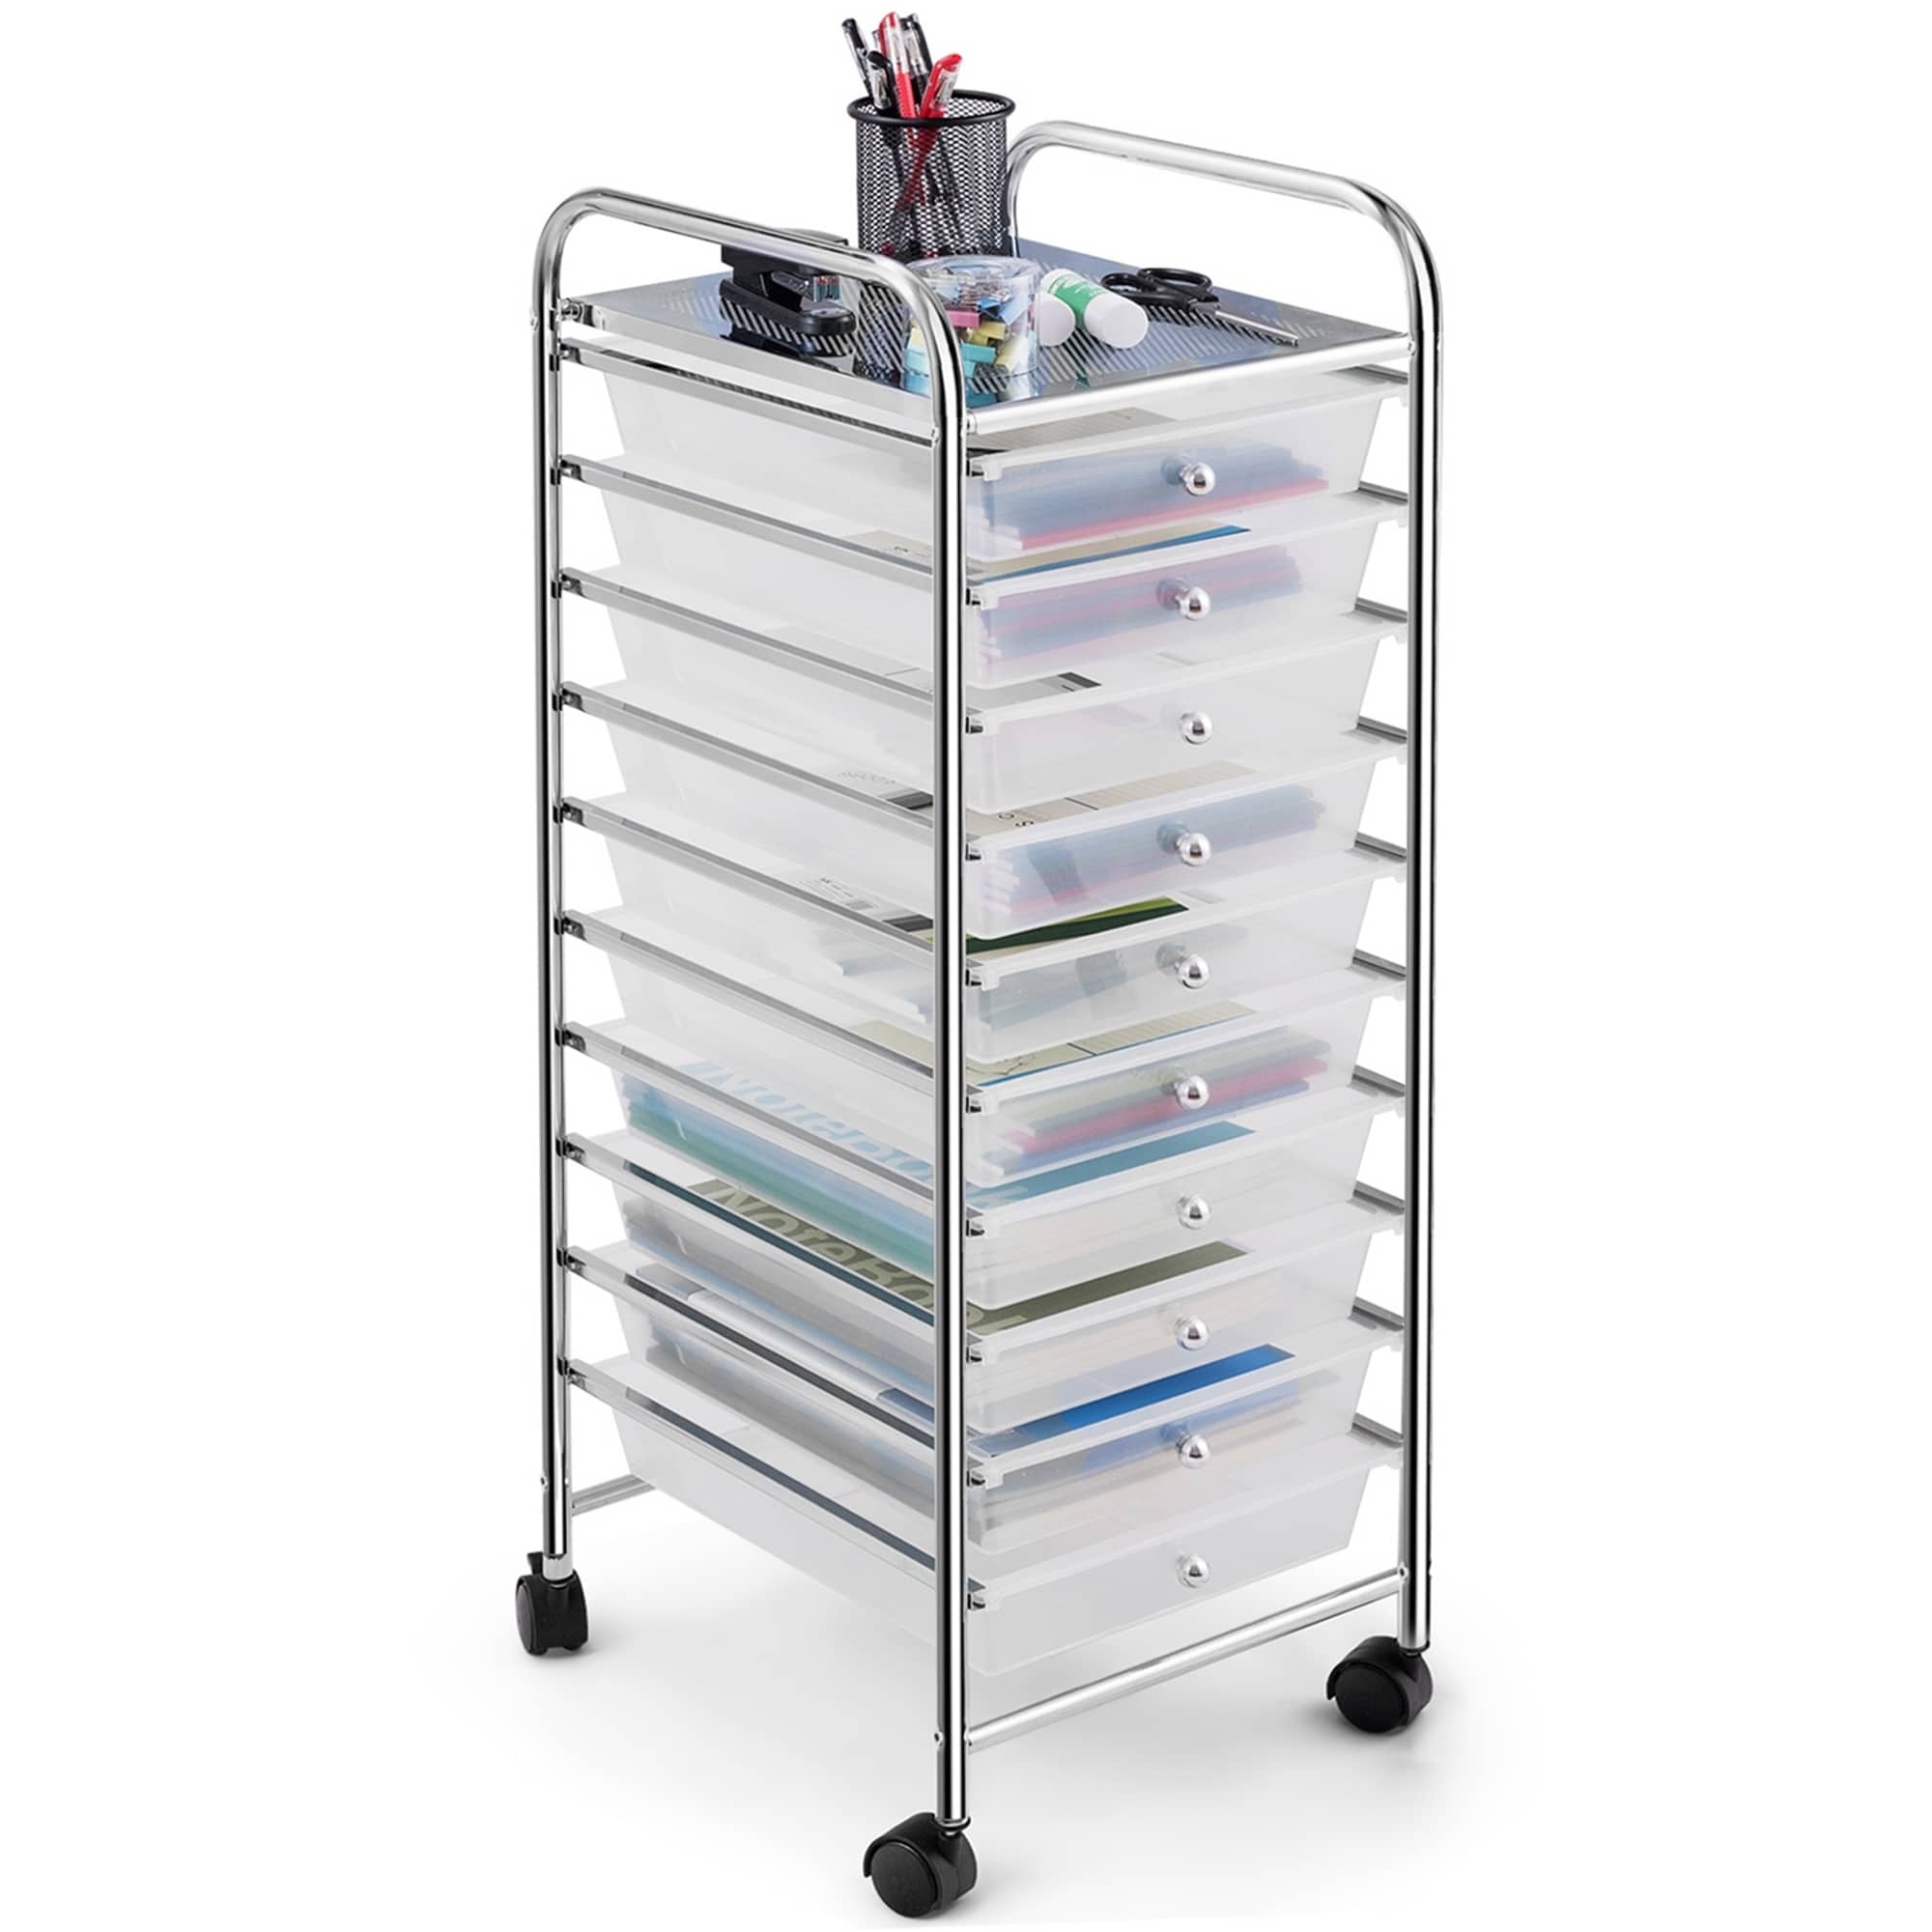 https://ak1.ostkcdn.com/images/products/is/images/direct/0a557651475abdefc4f914a798249b638a49f3be/Costway-10-Drawer-Rolling-Storage-Cart-Scrapbook-Paper-Office-School.jpg